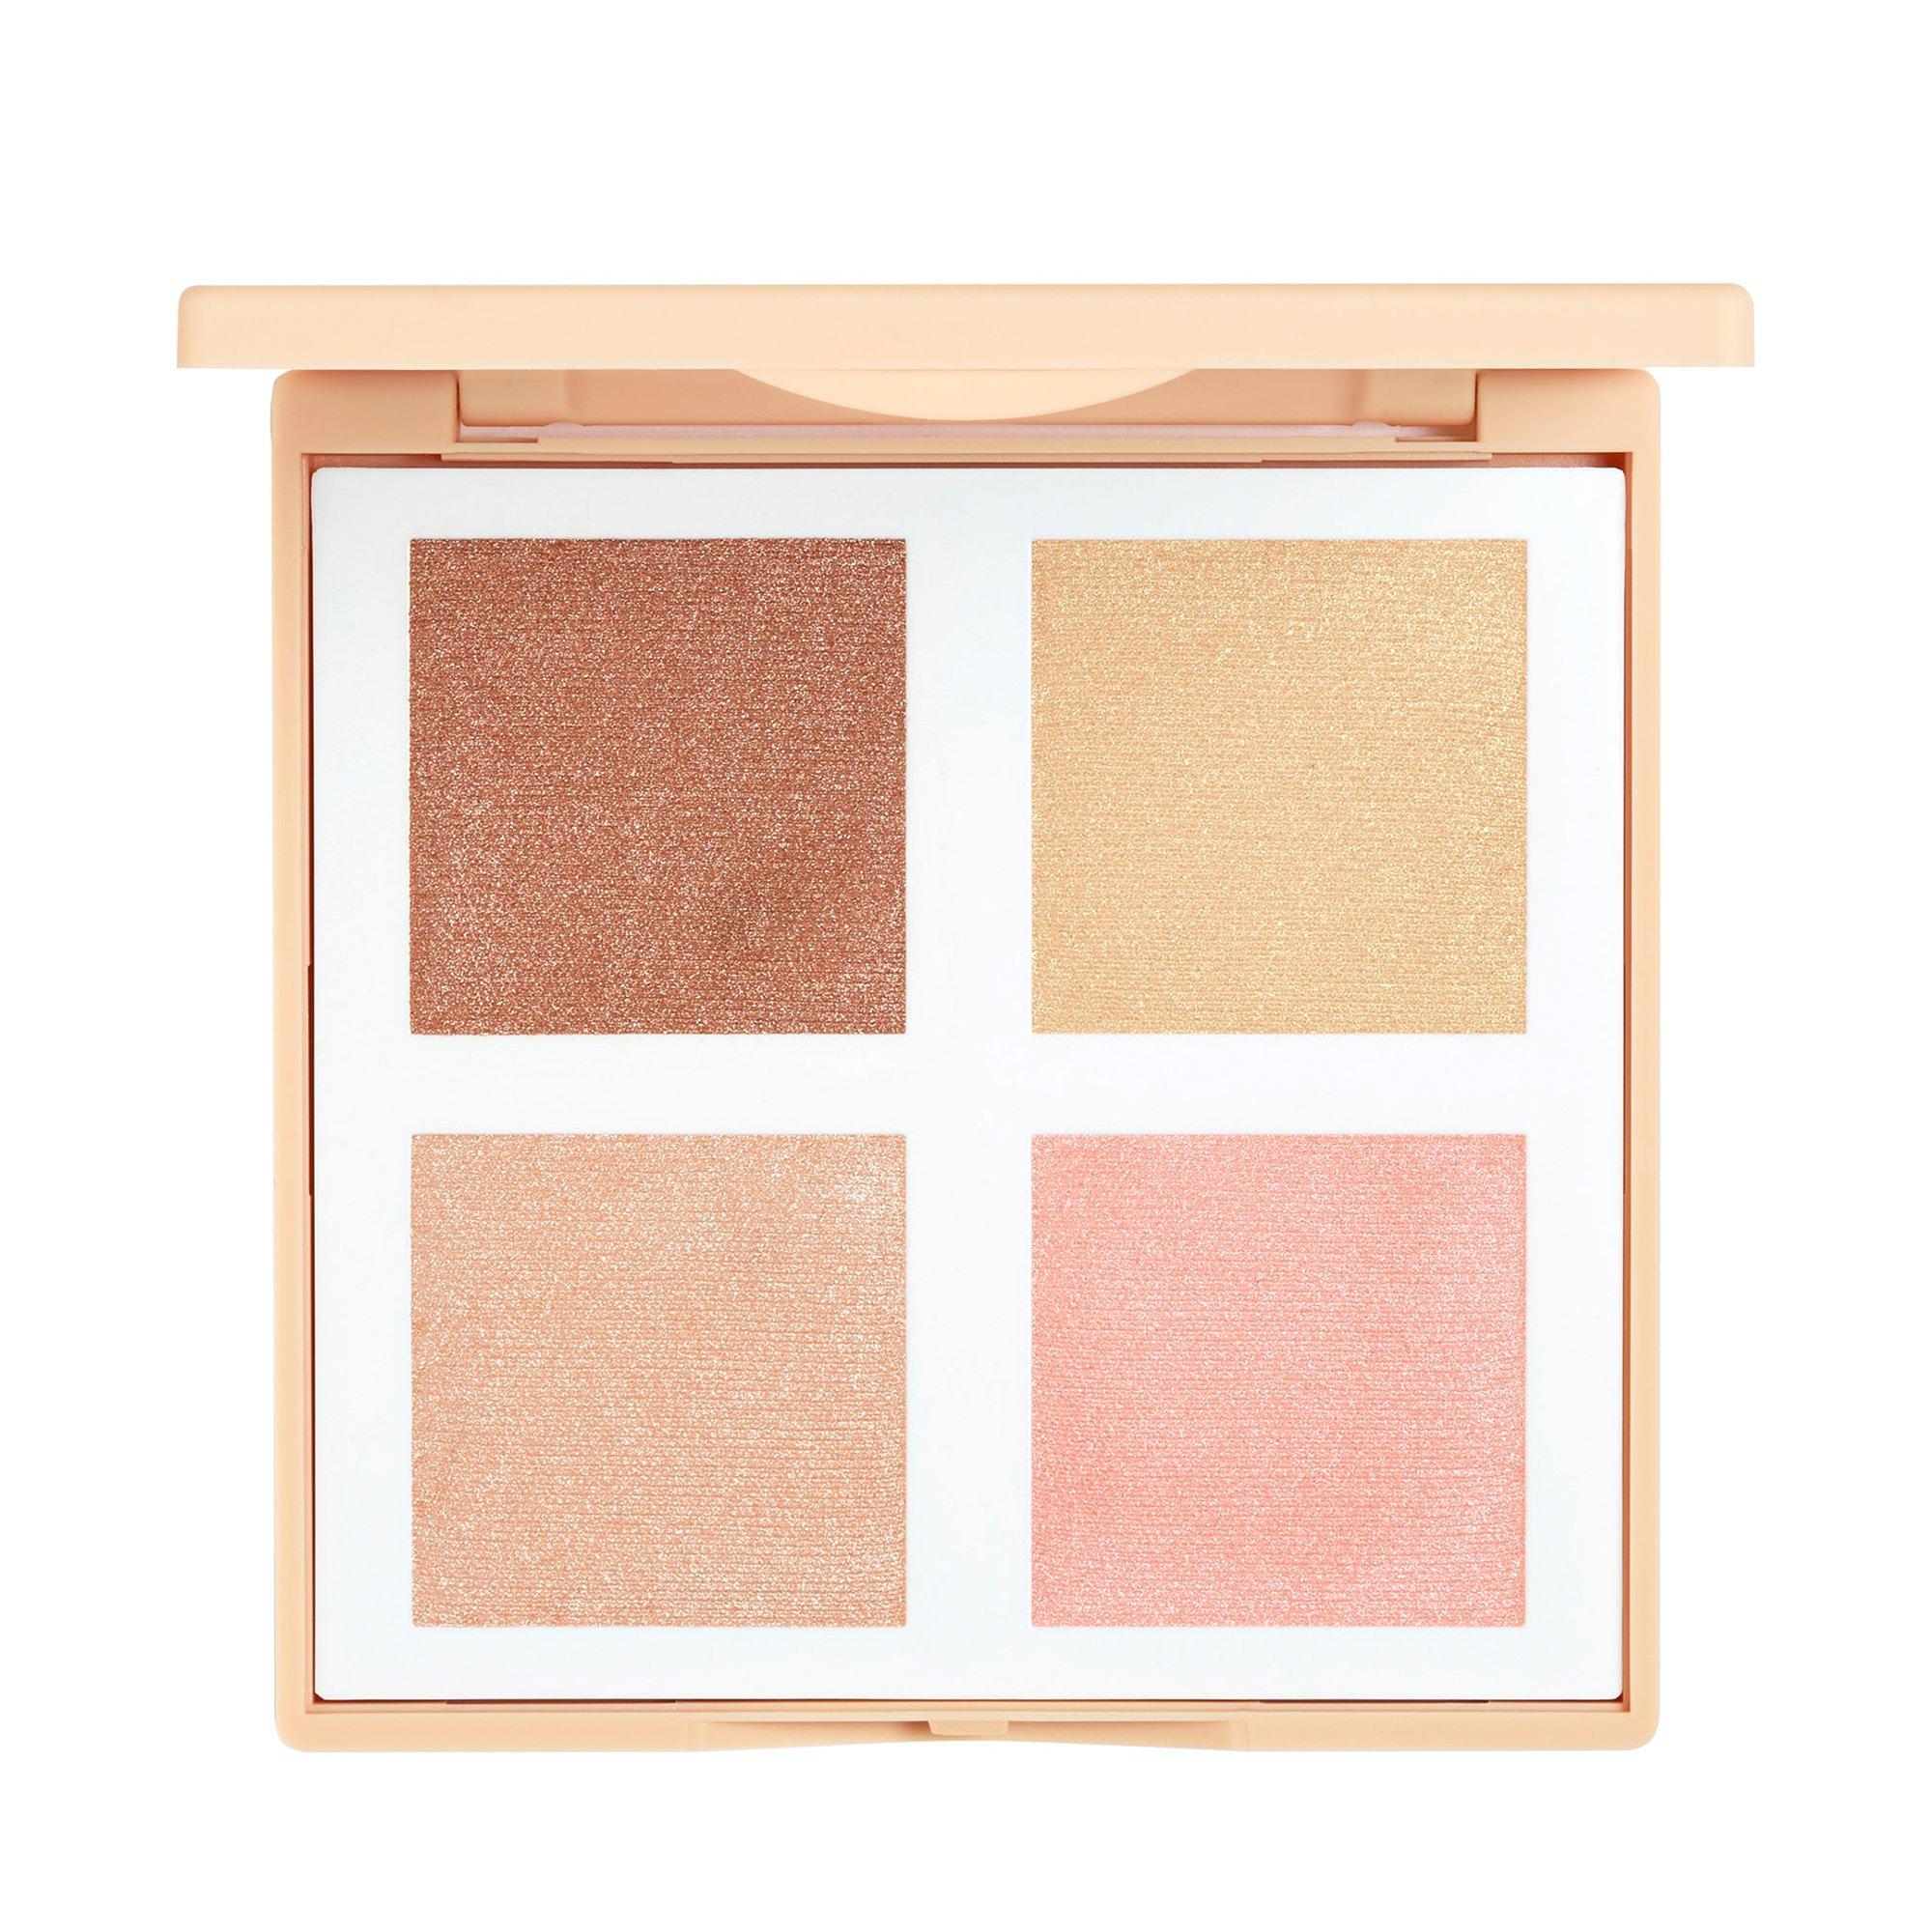 Image of 3INA The GlowIing Face Palette - 10g